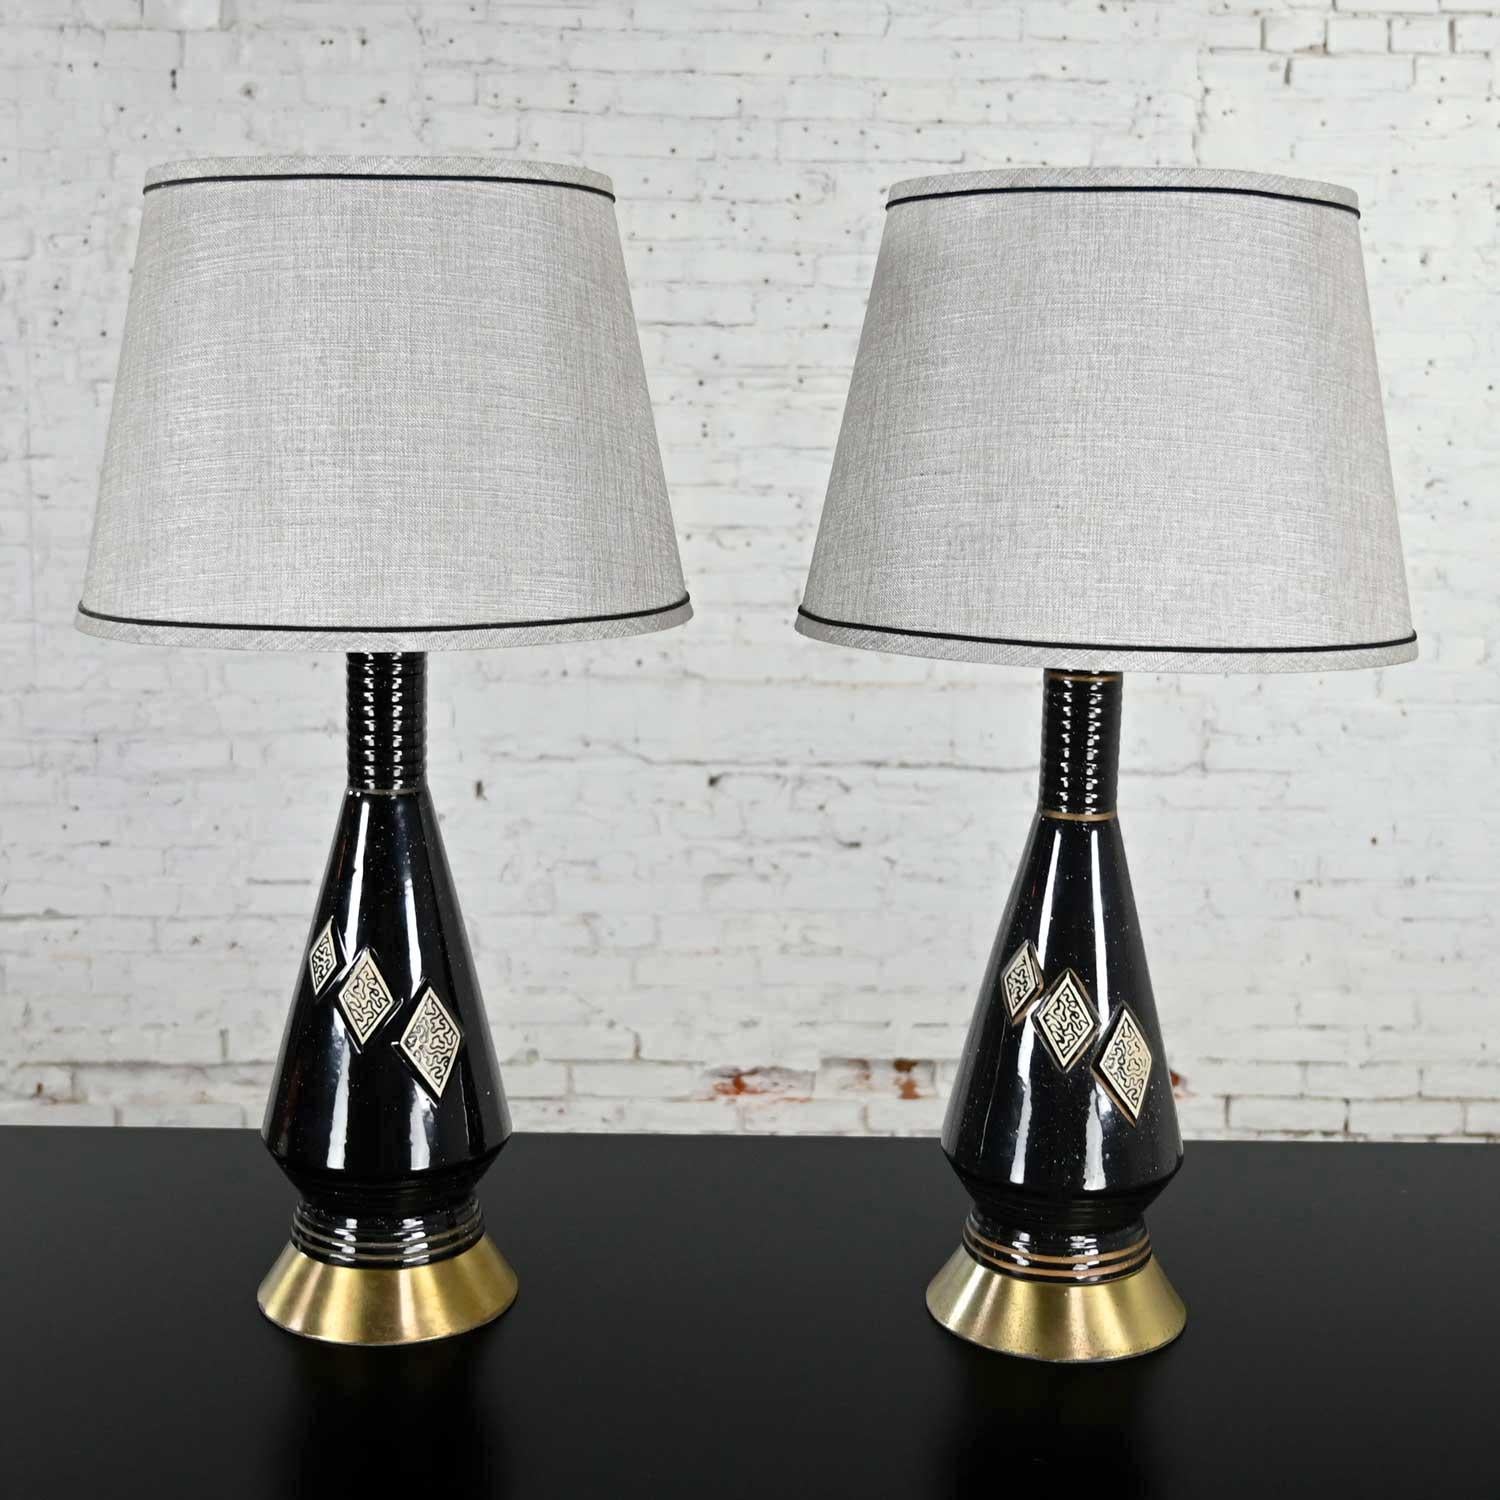 Metal Mid-Century Modern Black Ceramic Lamps with Harlequin Style Diamond Design For Sale